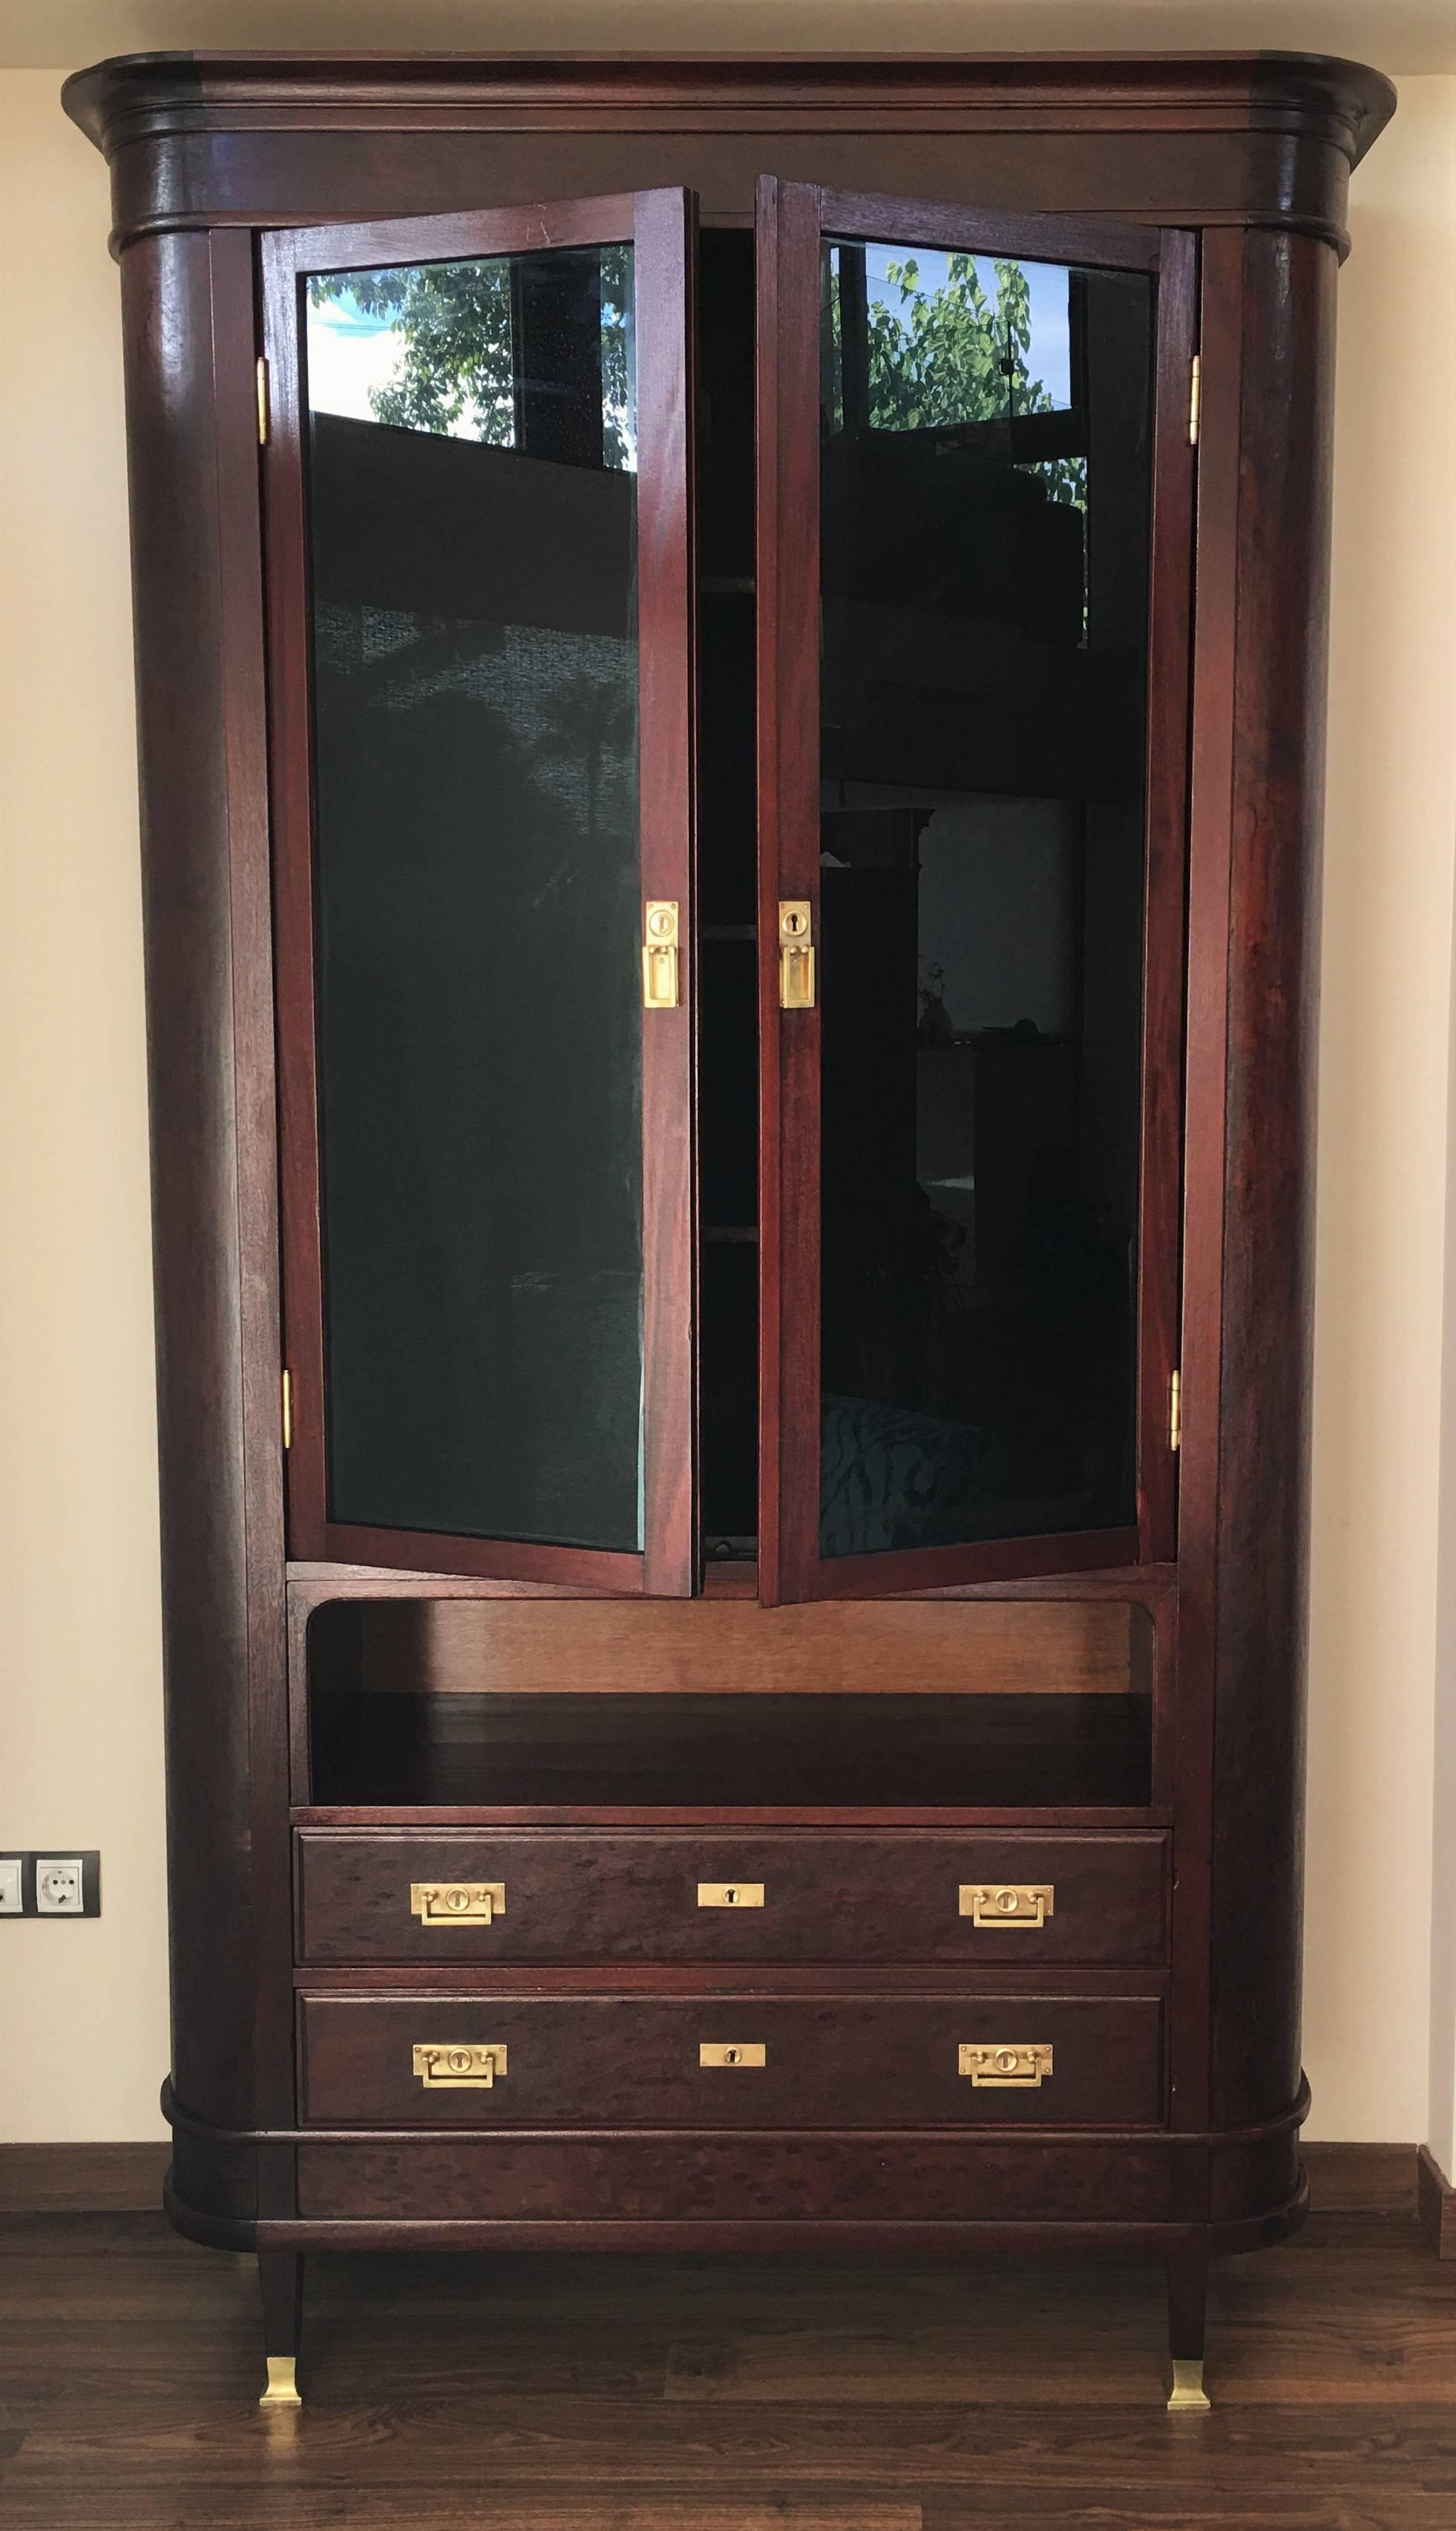 Mahogany Showcase Vitrine Art Decó with two drawers

Impressive mahogany bookcase from the 1920s. Upper section has two black glass-front doors with three shelves, perfect for housing and showcasing your books or collectables. Lower section has